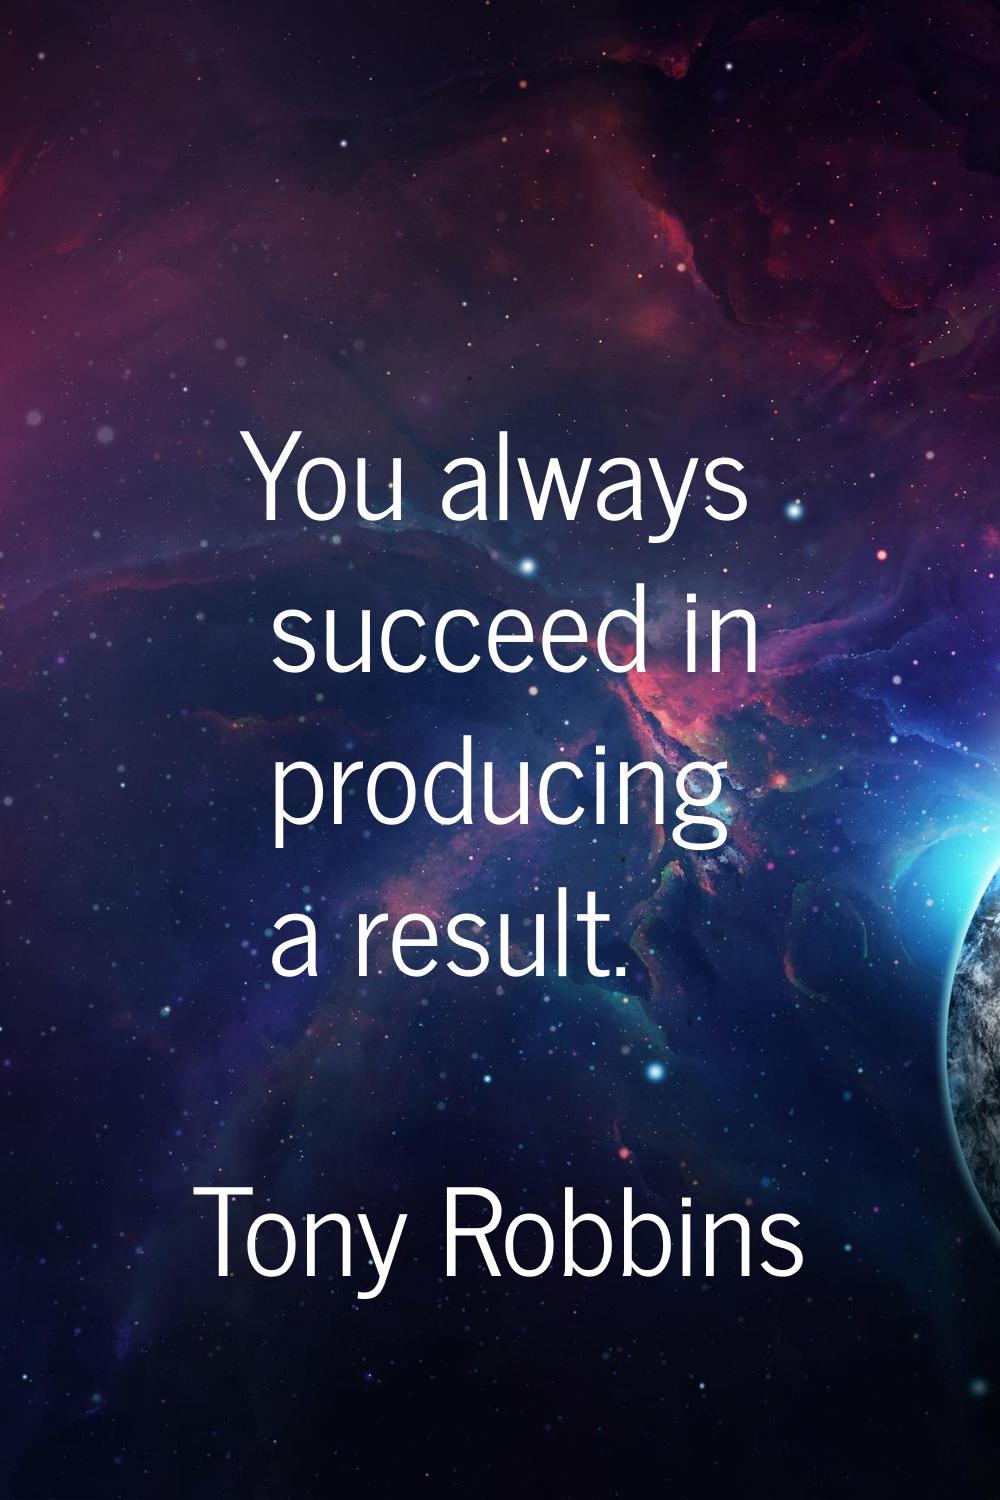 You always succeed in producing a result.